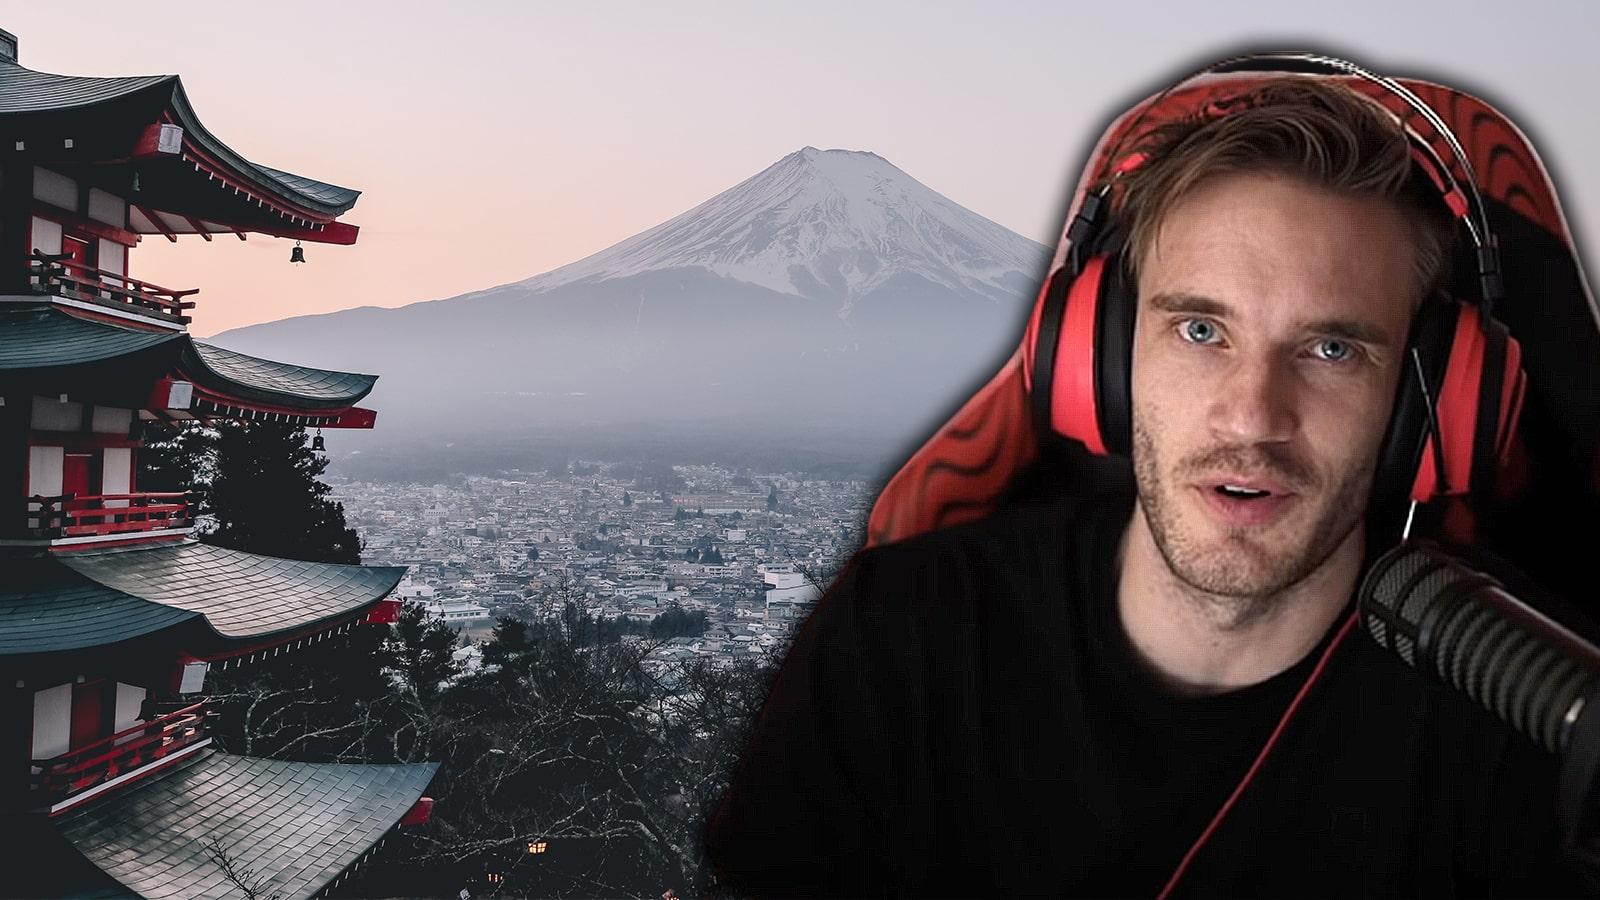 PewDiePie explains why he hasn't moved to Japan yet